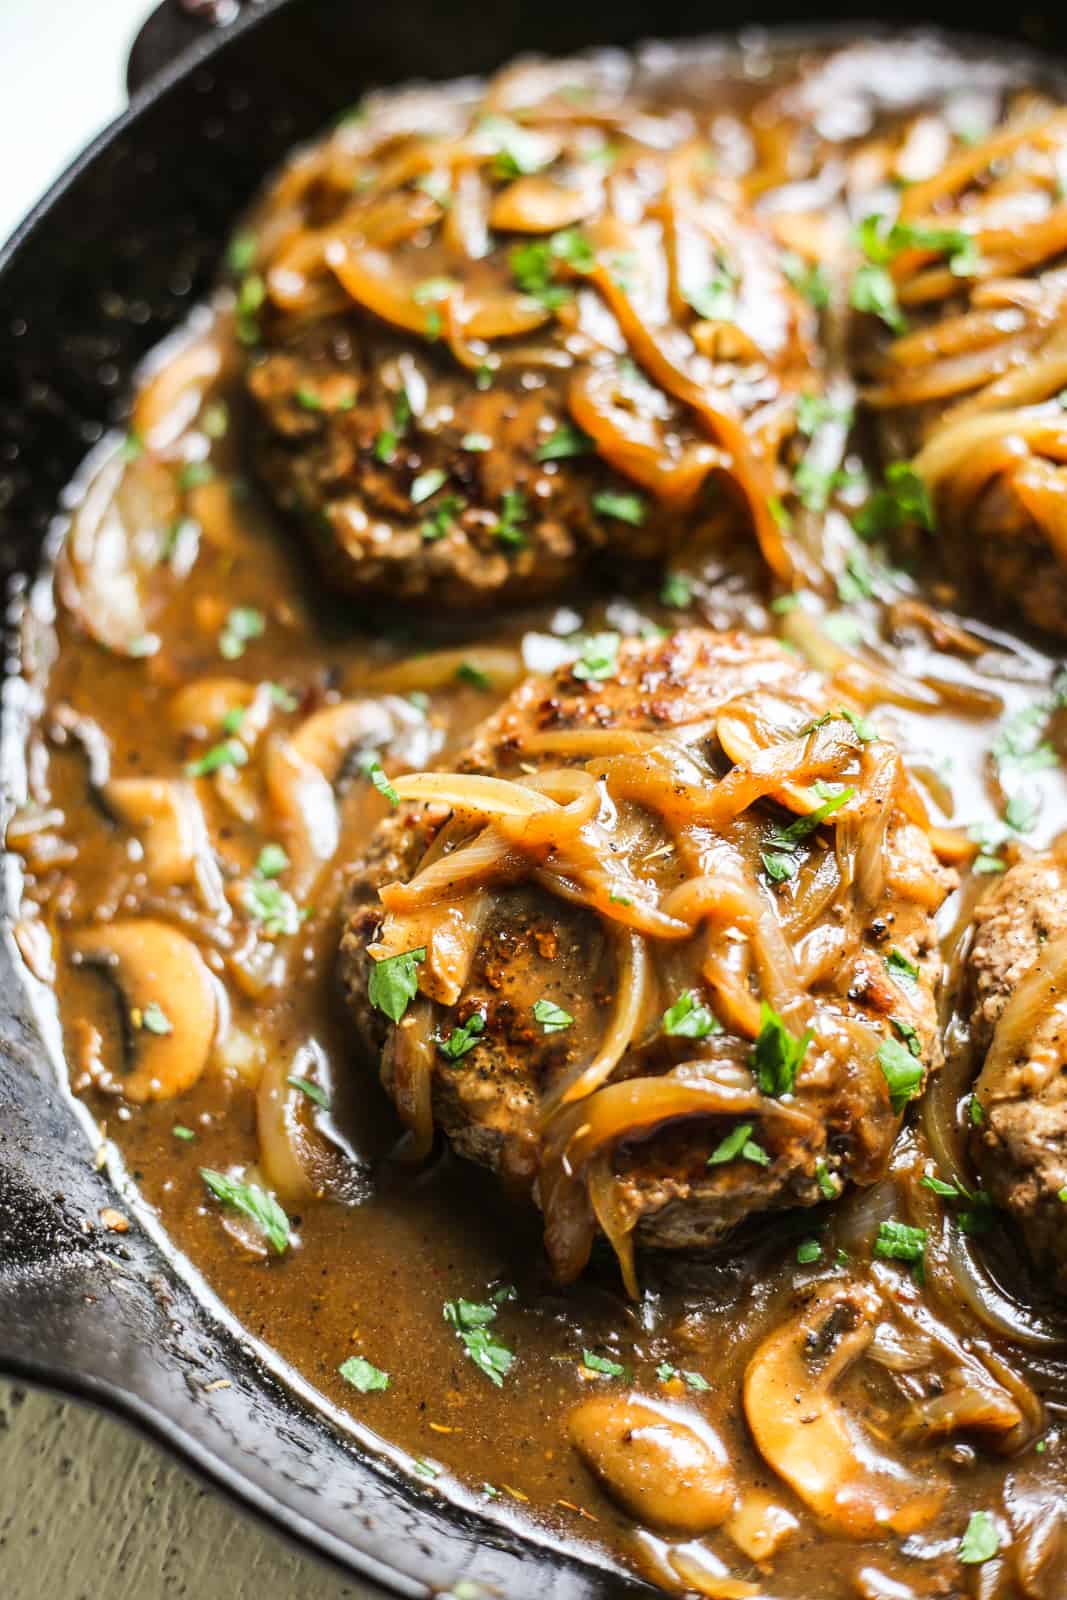 Southern Style Hamburger Steaks With Onion And Mushroom Gravy The Defined Dish